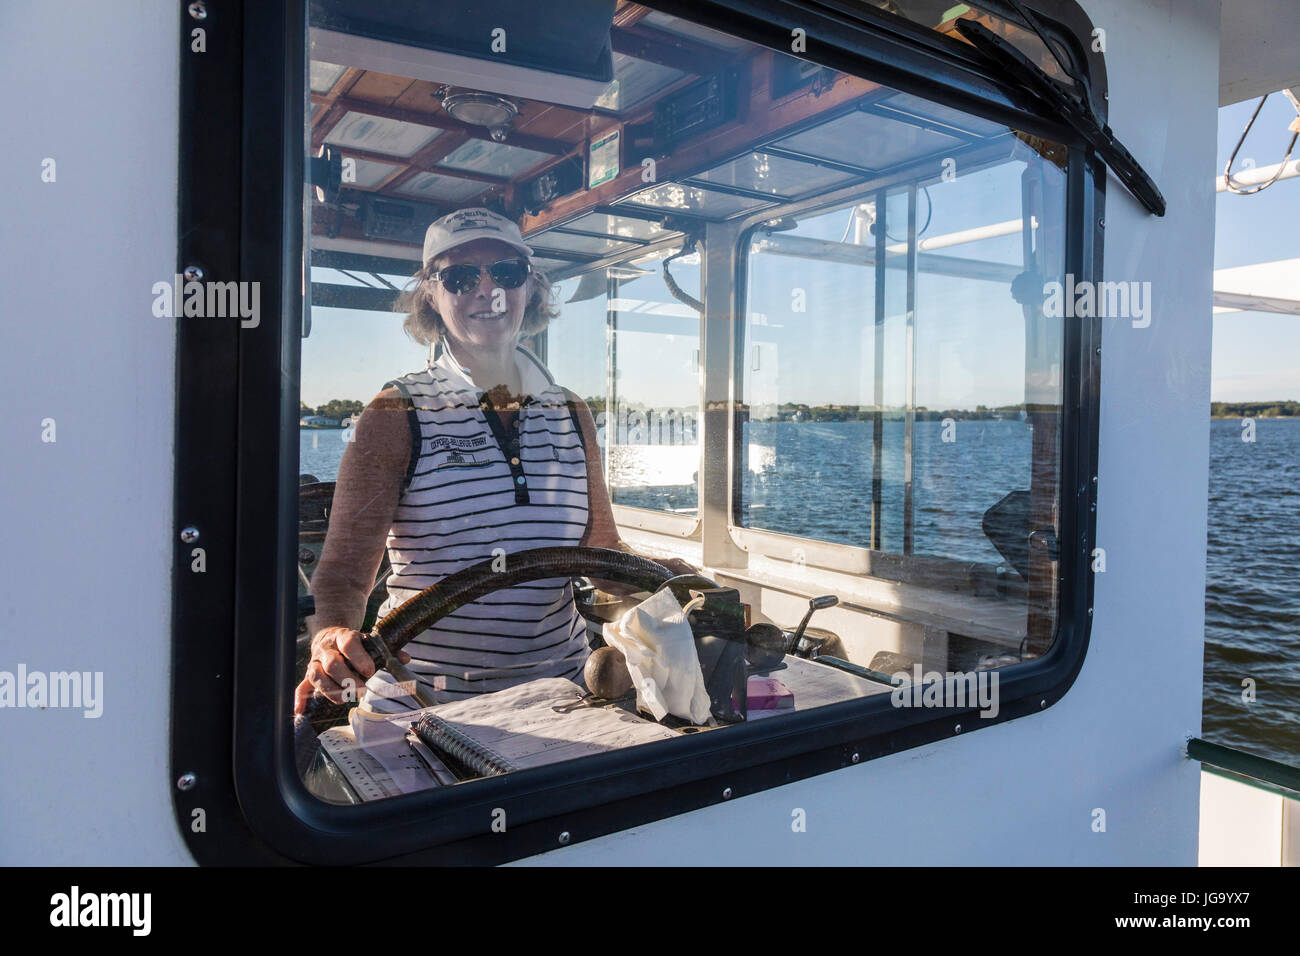 Oxford, Maryland - Marcia LoVerdi pilots the Bellevue-Oxford car ferry across the Tred Avon River near the Chesapeake Bay. LoVerdi has captained the f Stock Photo